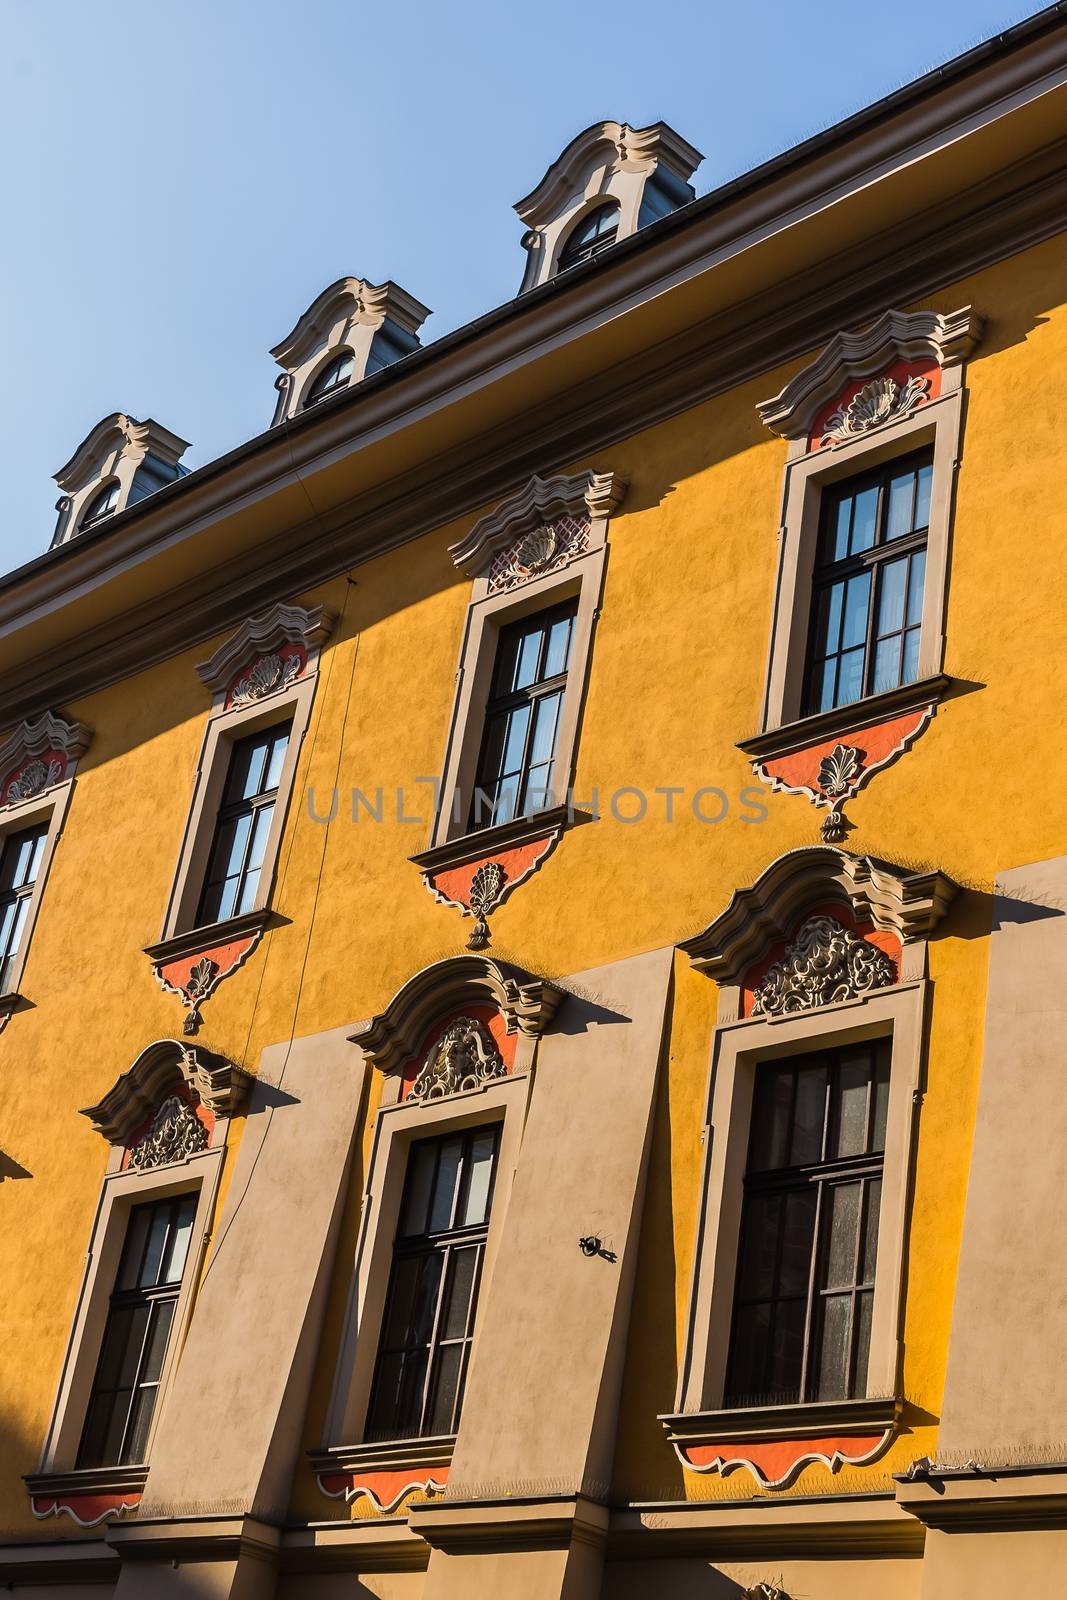 Facade of an ancient tenement in the Old Town in Krakow, Poland.